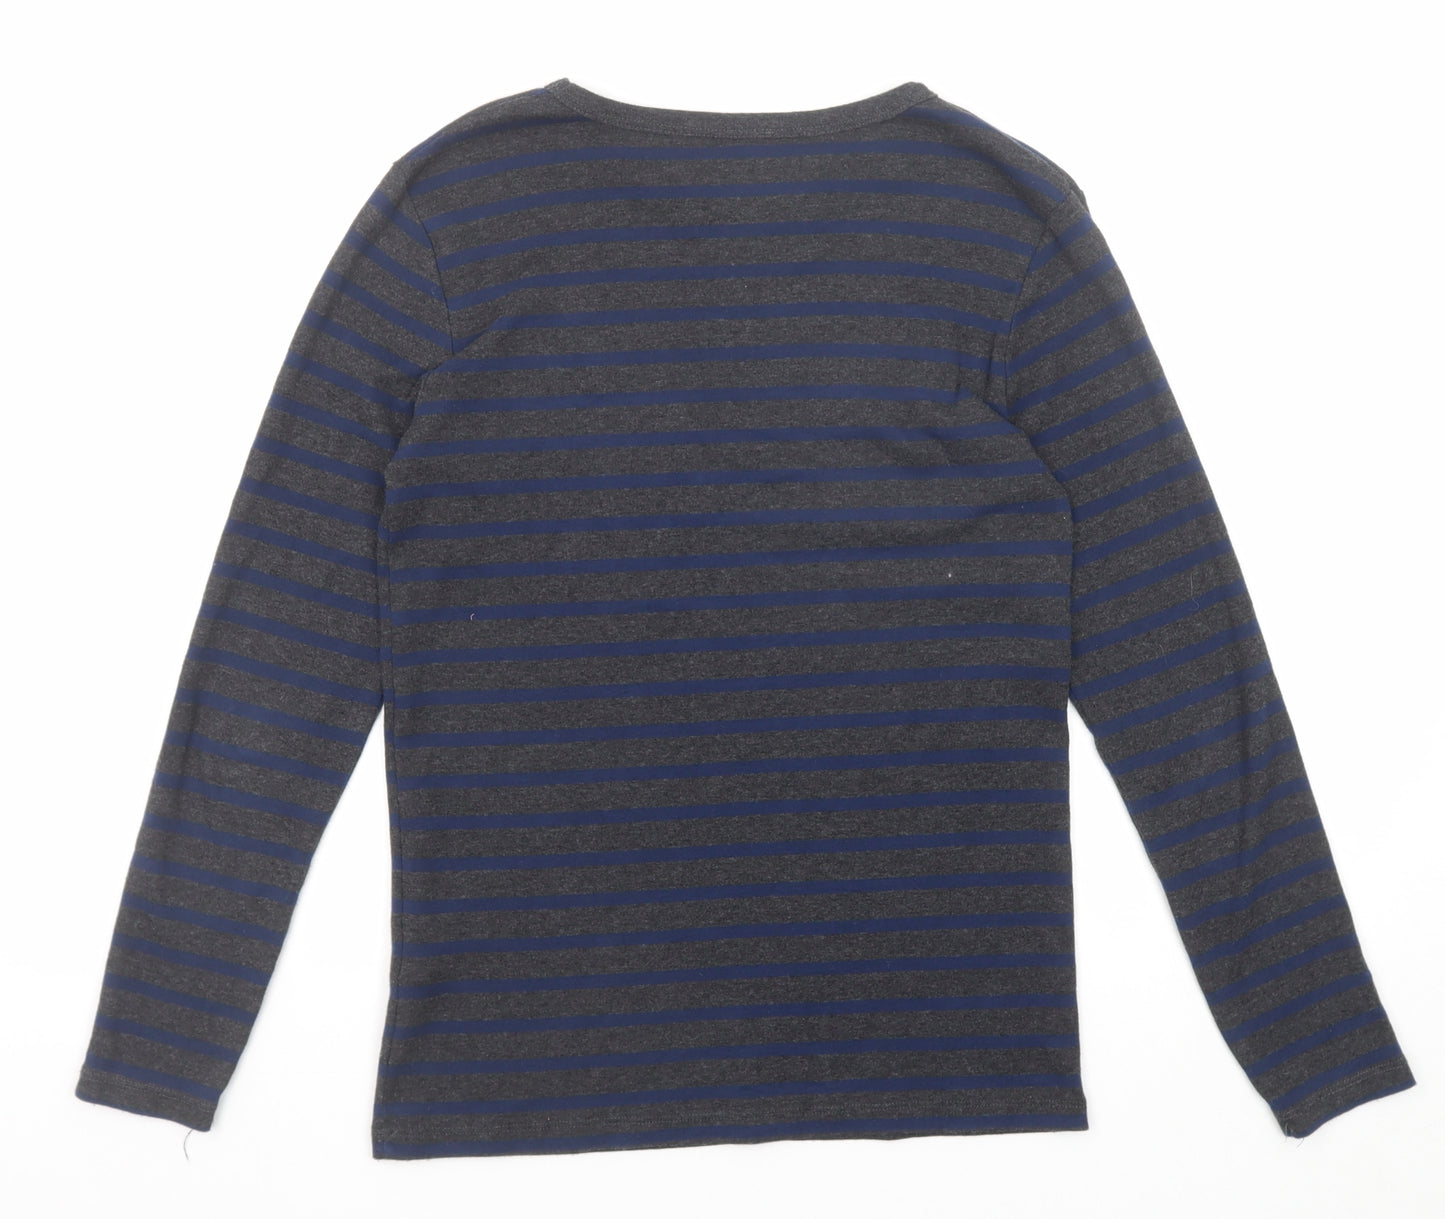 H&M Boys Grey Striped Cotton Pullover T-Shirt Size 13-14 Years Round Neck Pullover